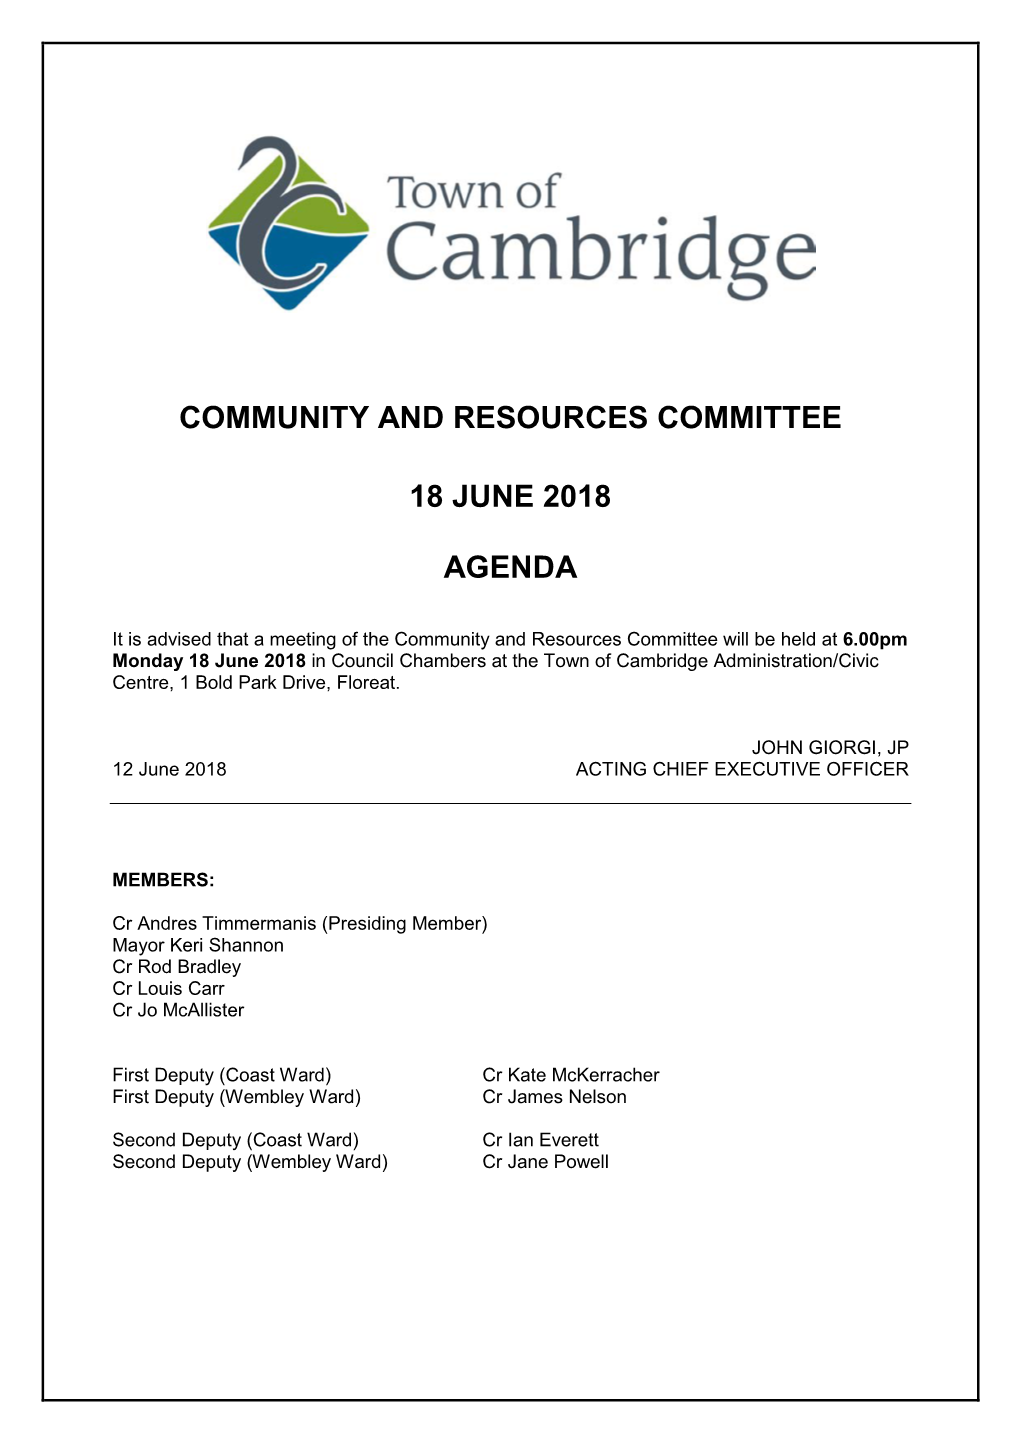 Community and Resources Committee 18 June 2018 Agenda